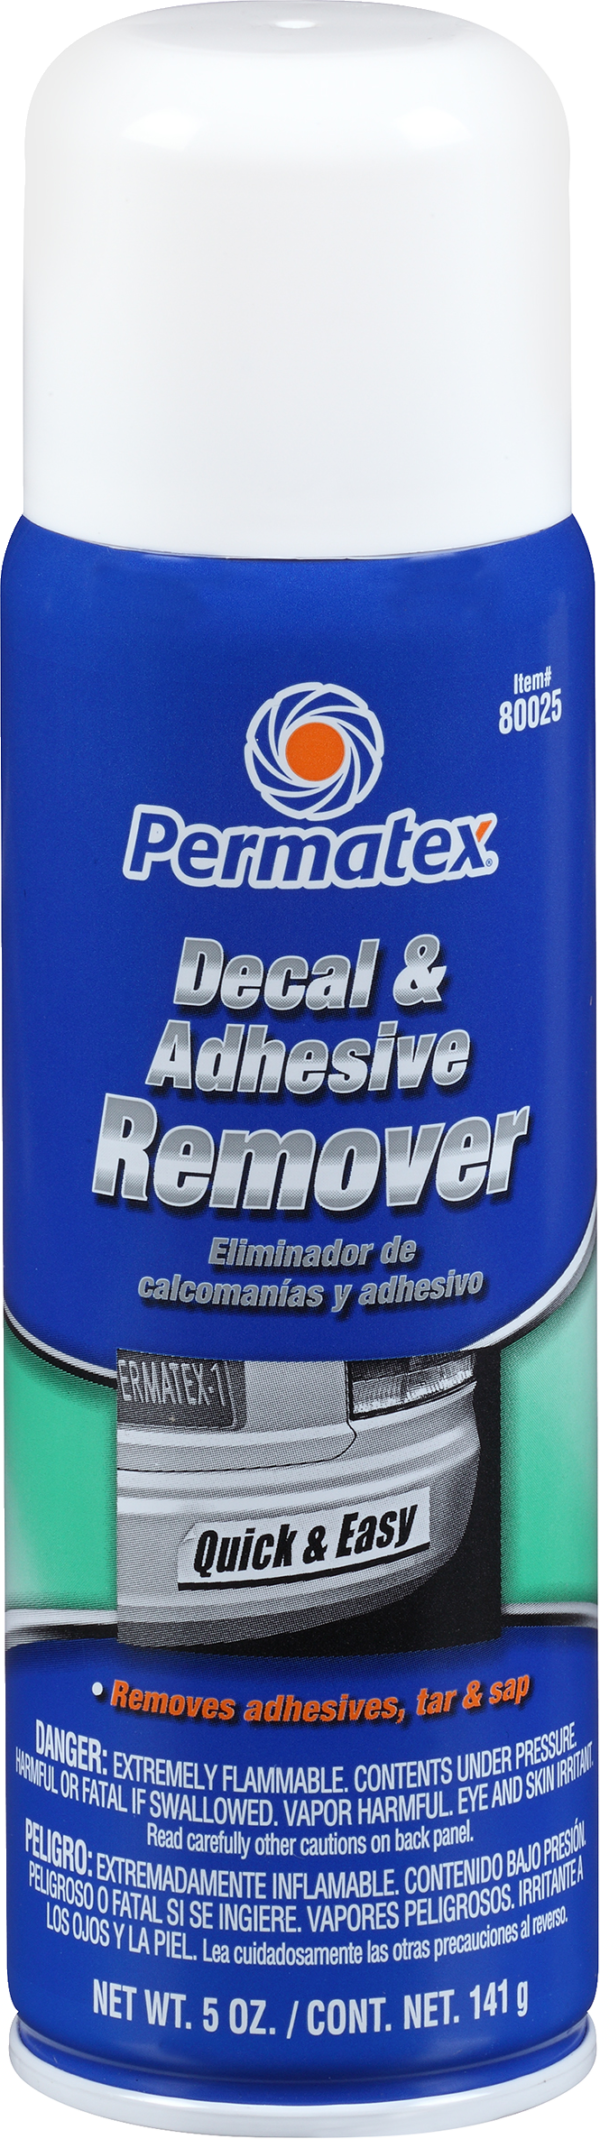 Decal/Adhesive Remover Image